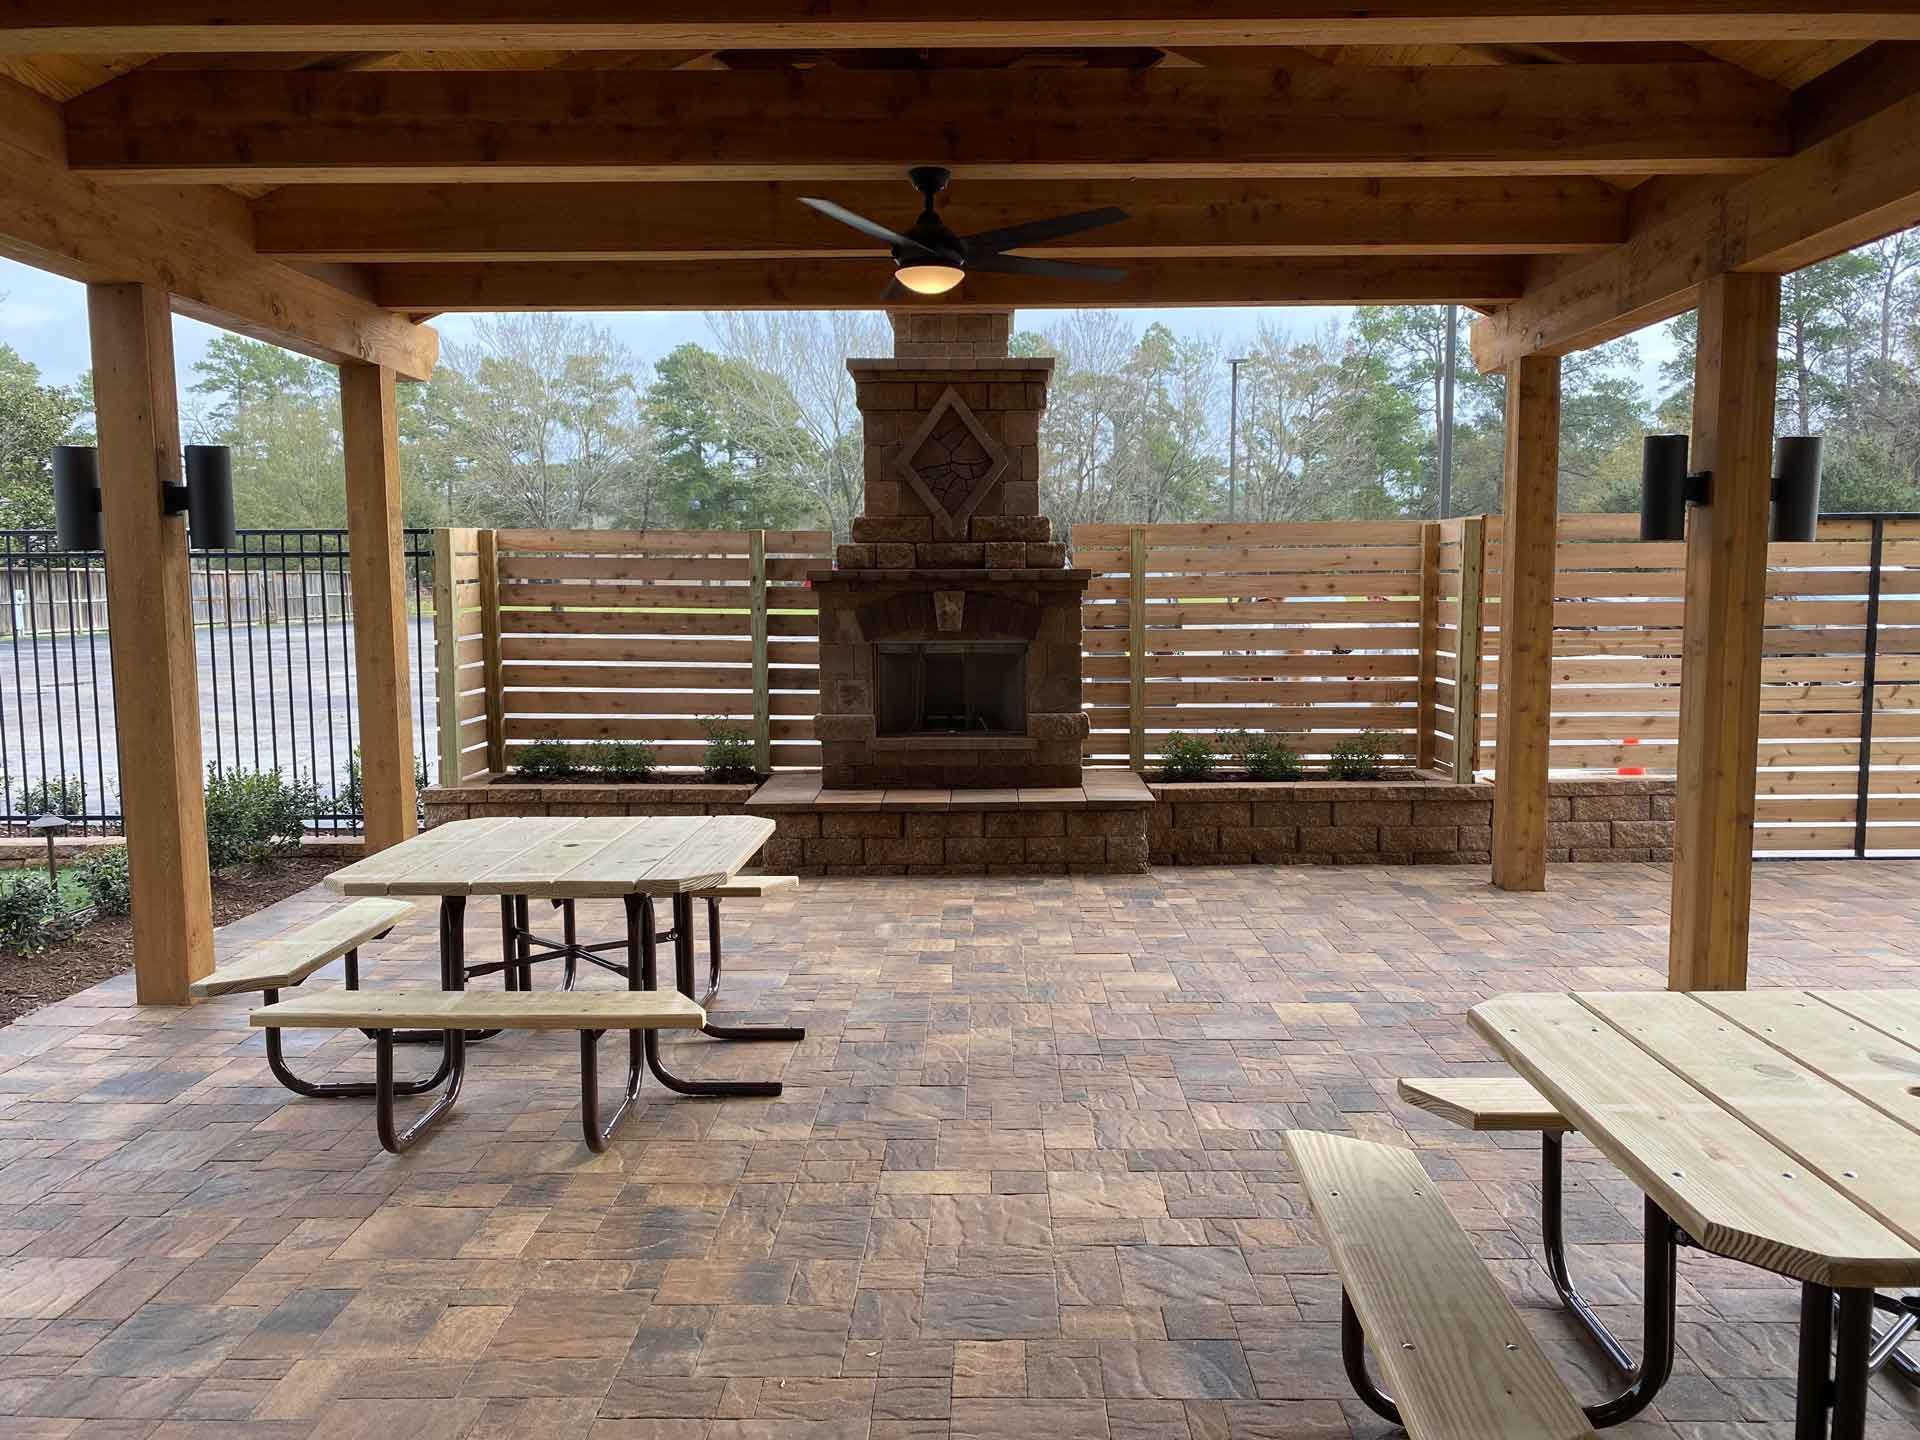 Limestone patio covered in wood with fireplace